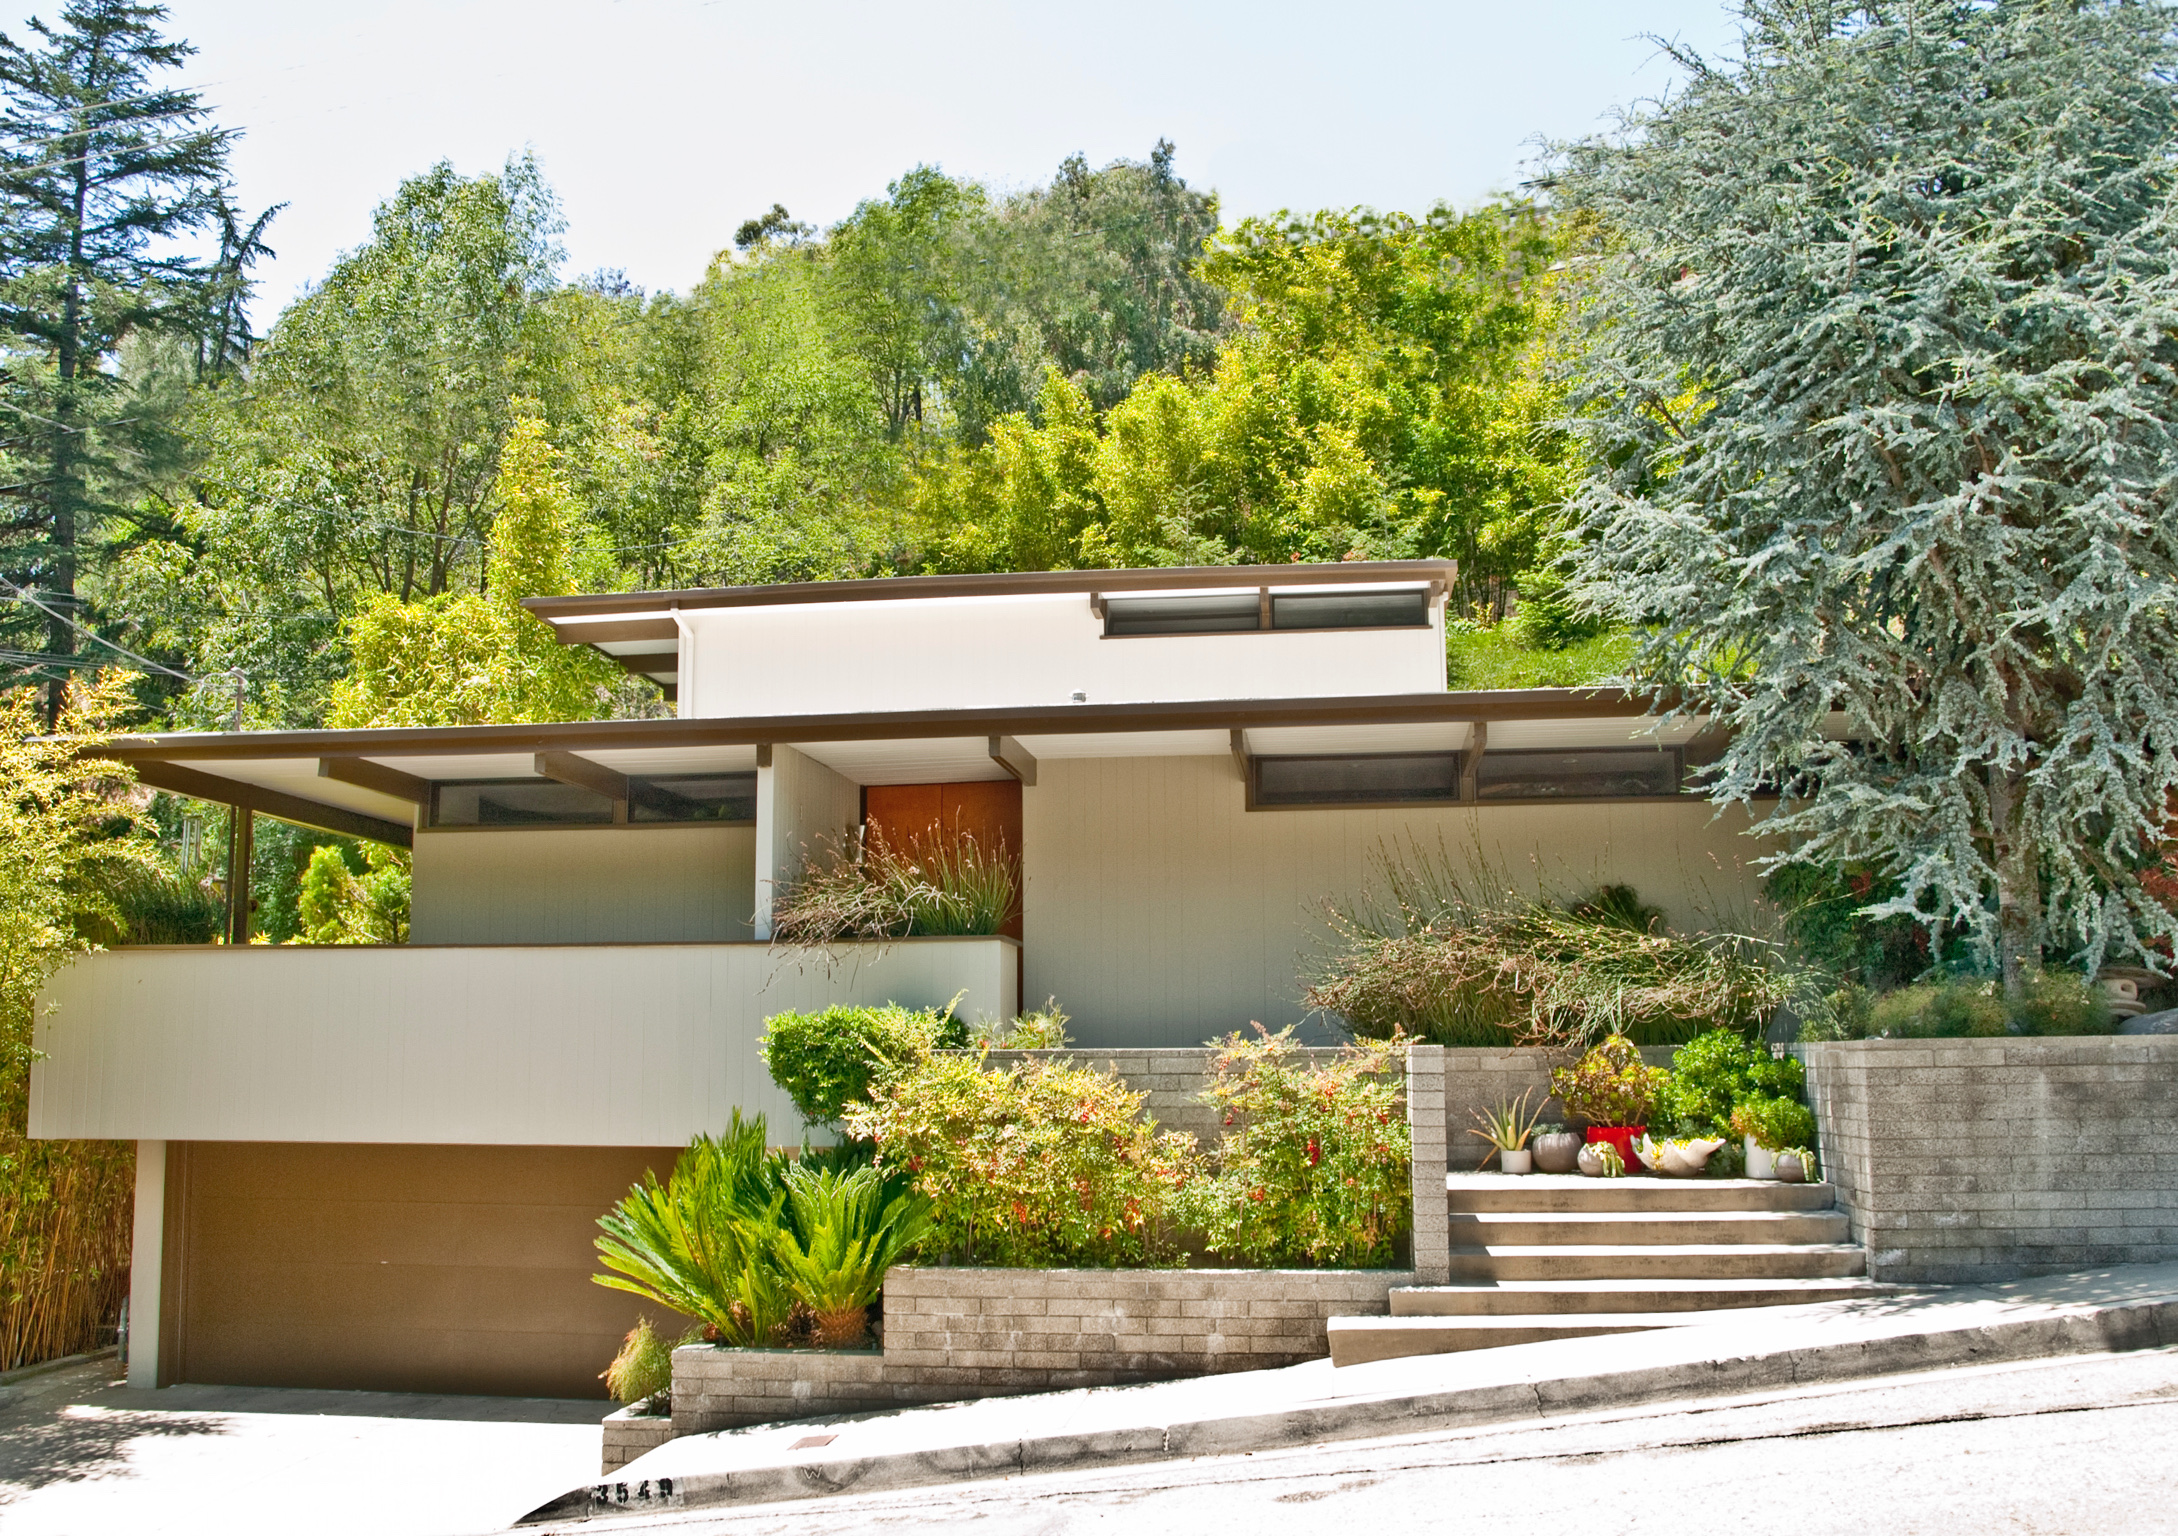 Phil Missig - Real Estate - Architectural Significant Property - Studio City - Calvin Straub - Post &amp; Beam - Mid Century Modern